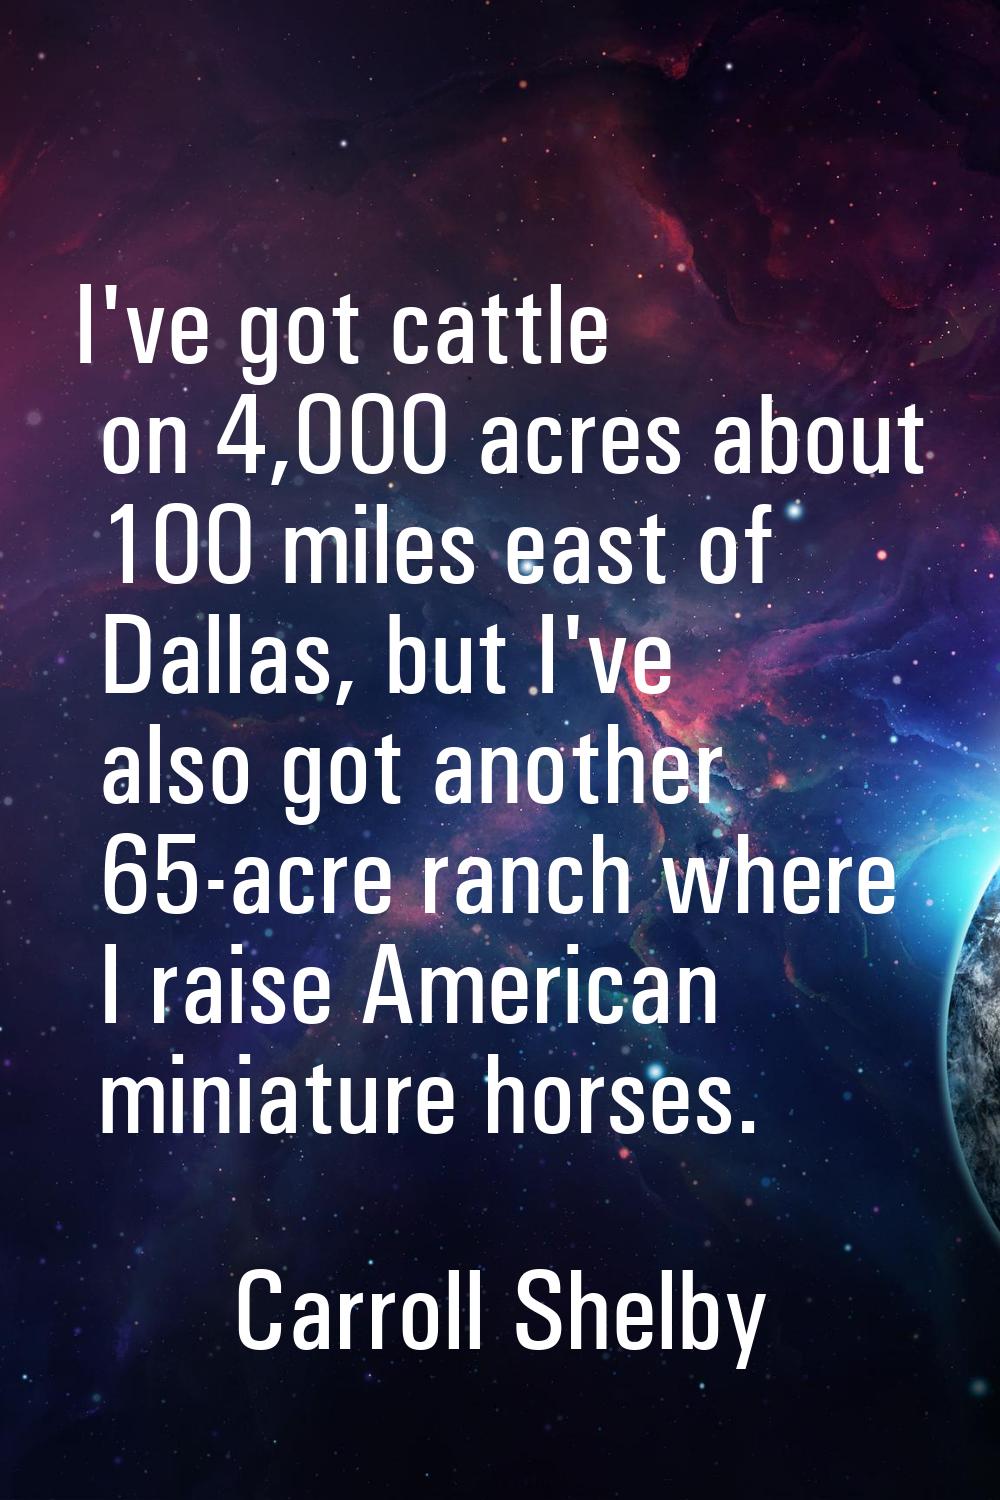 I've got cattle on 4,000 acres about 100 miles east of Dallas, but I've also got another 65-acre ra